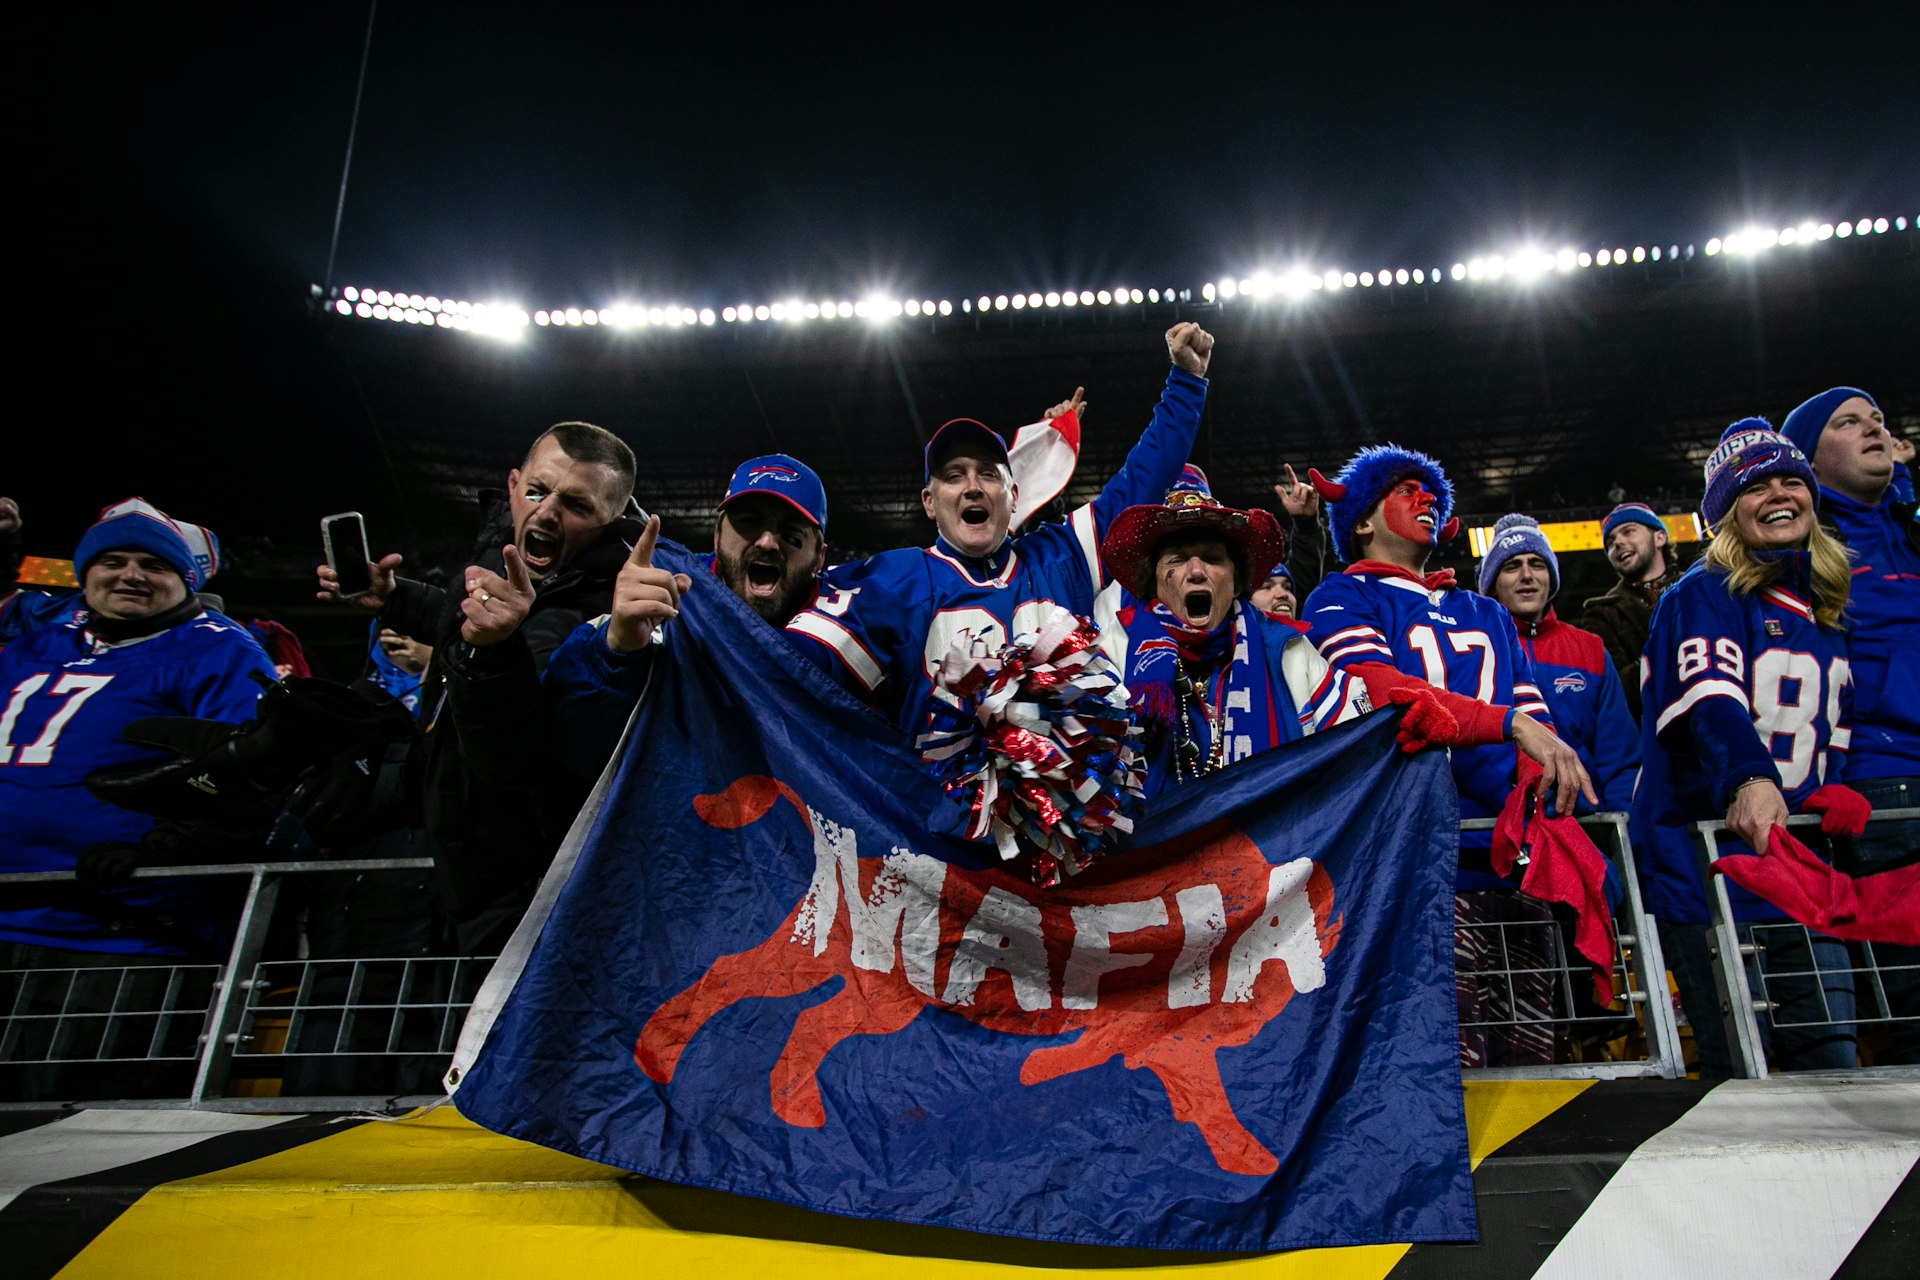 Bills Mafia fans hold a flag that says "mafia" and cheer during the NFL football game